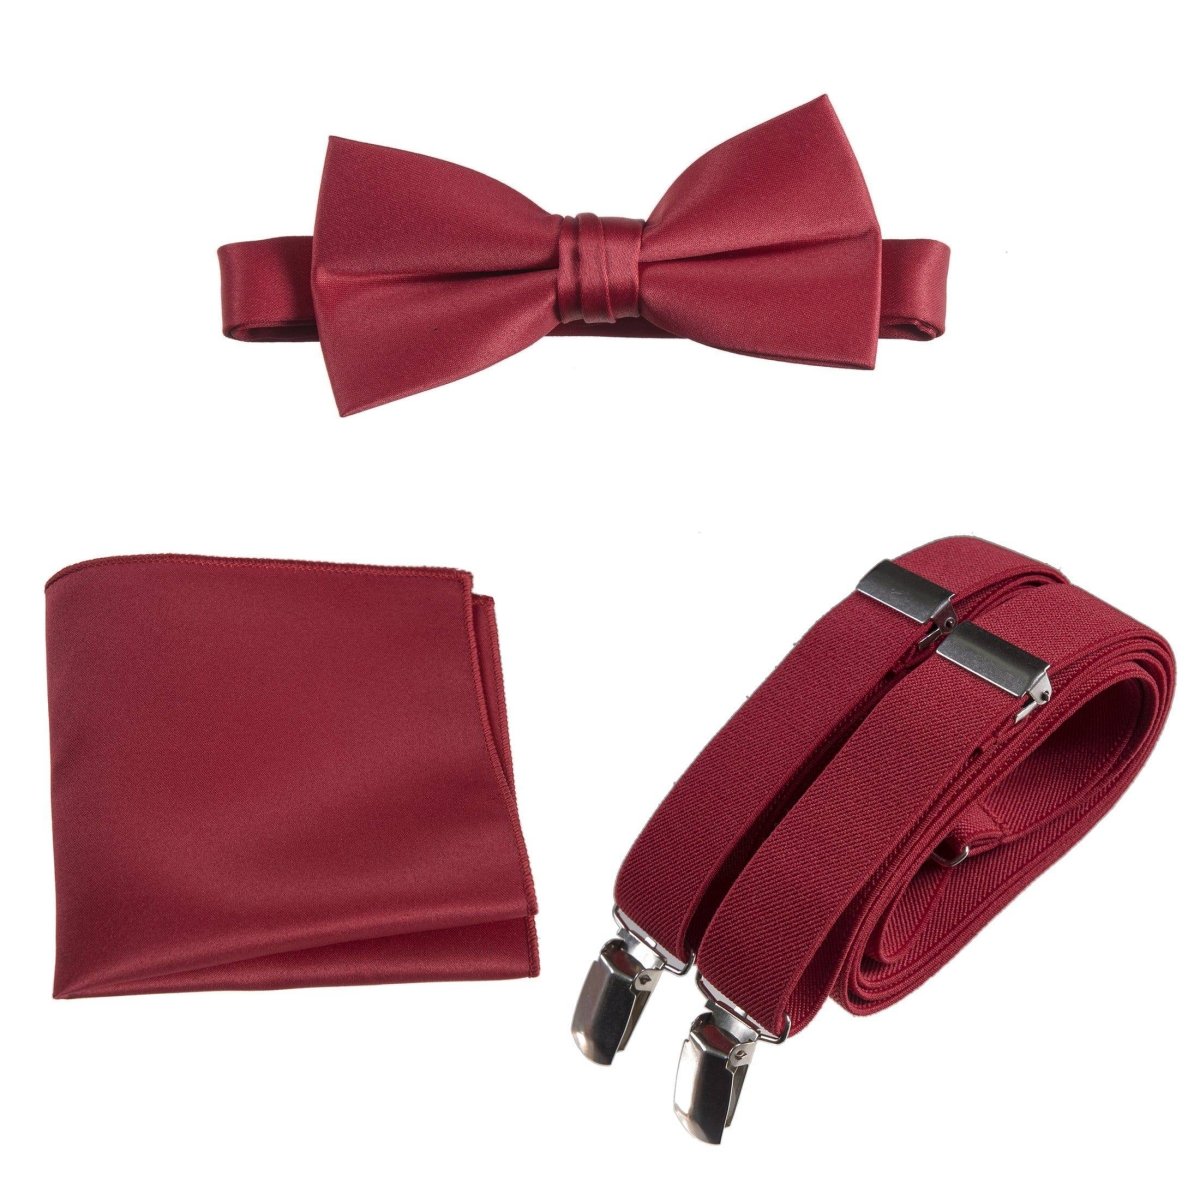 Tuxgear Pre-tied Bow Tie & Pocket Square with Adjustable Stretch